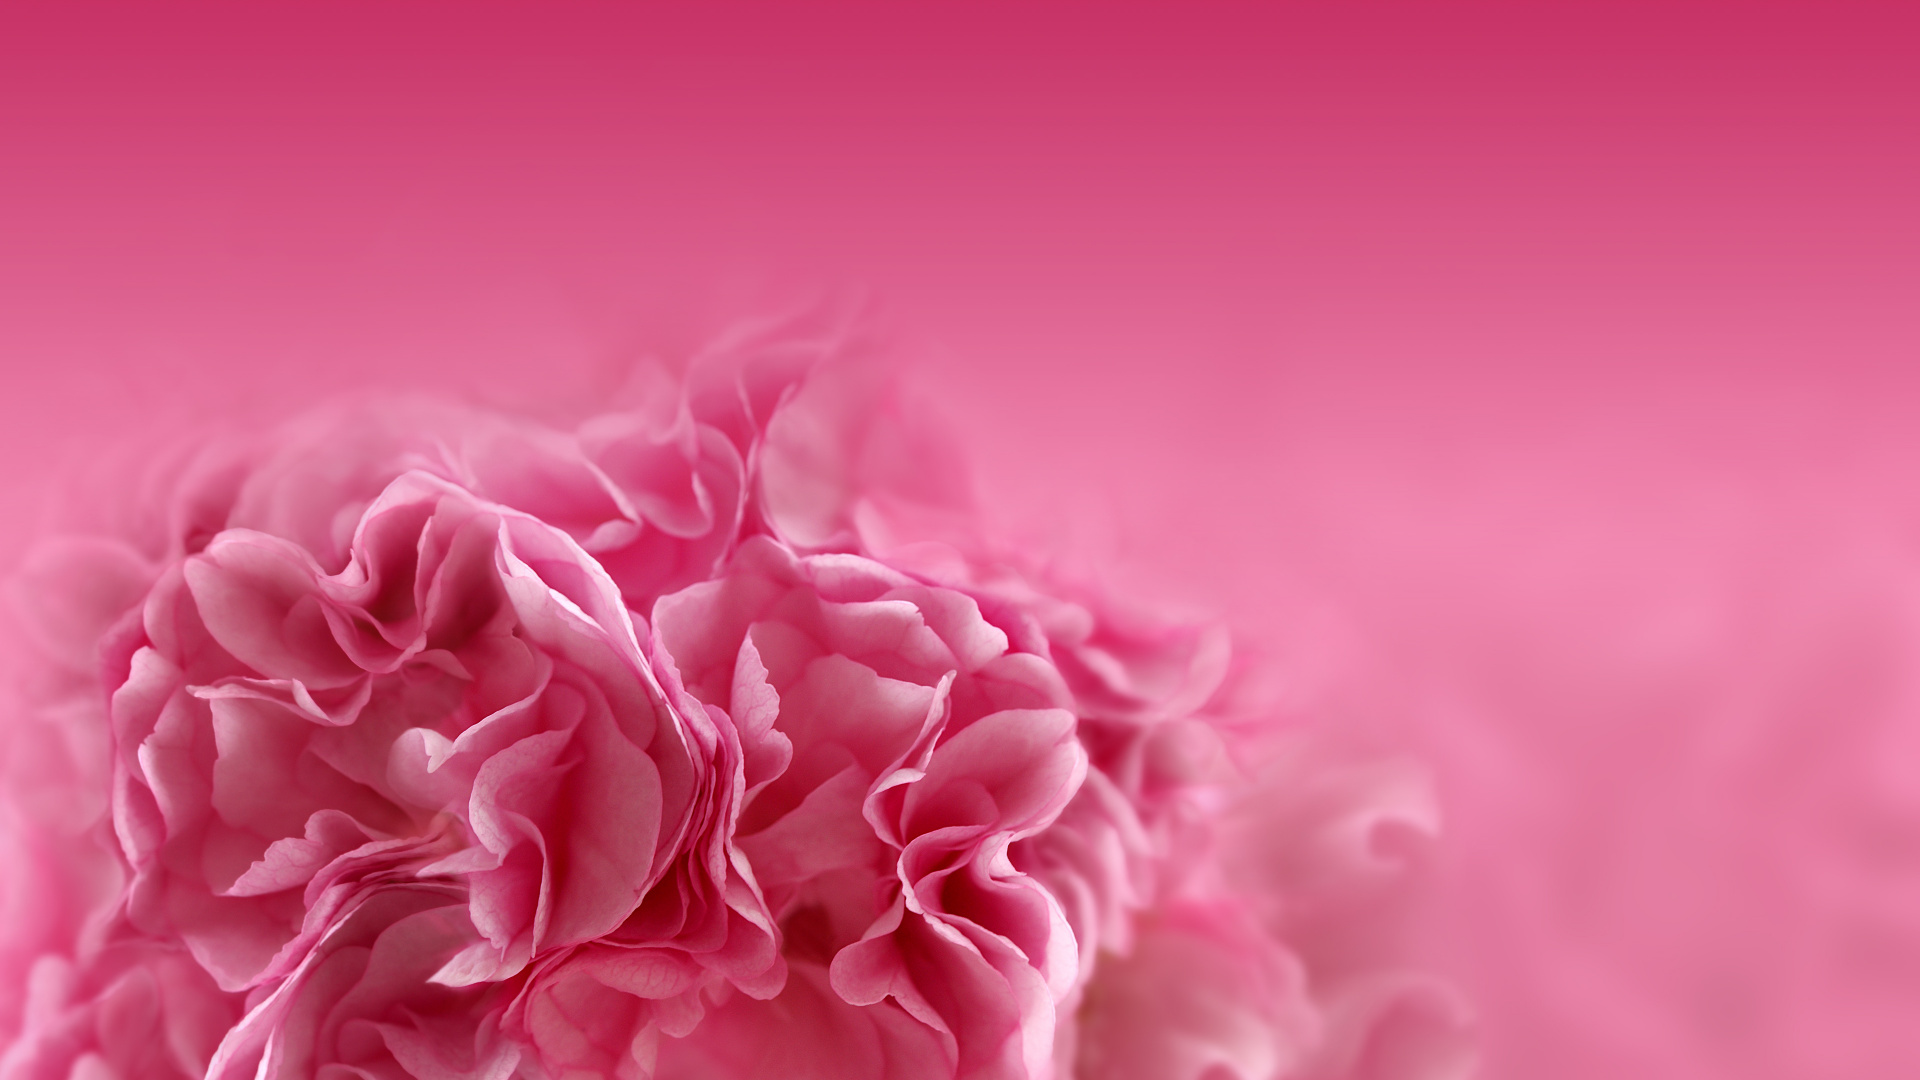 Pink Rose in Close up Photography. Wallpaper in 1920x1080 Resolution